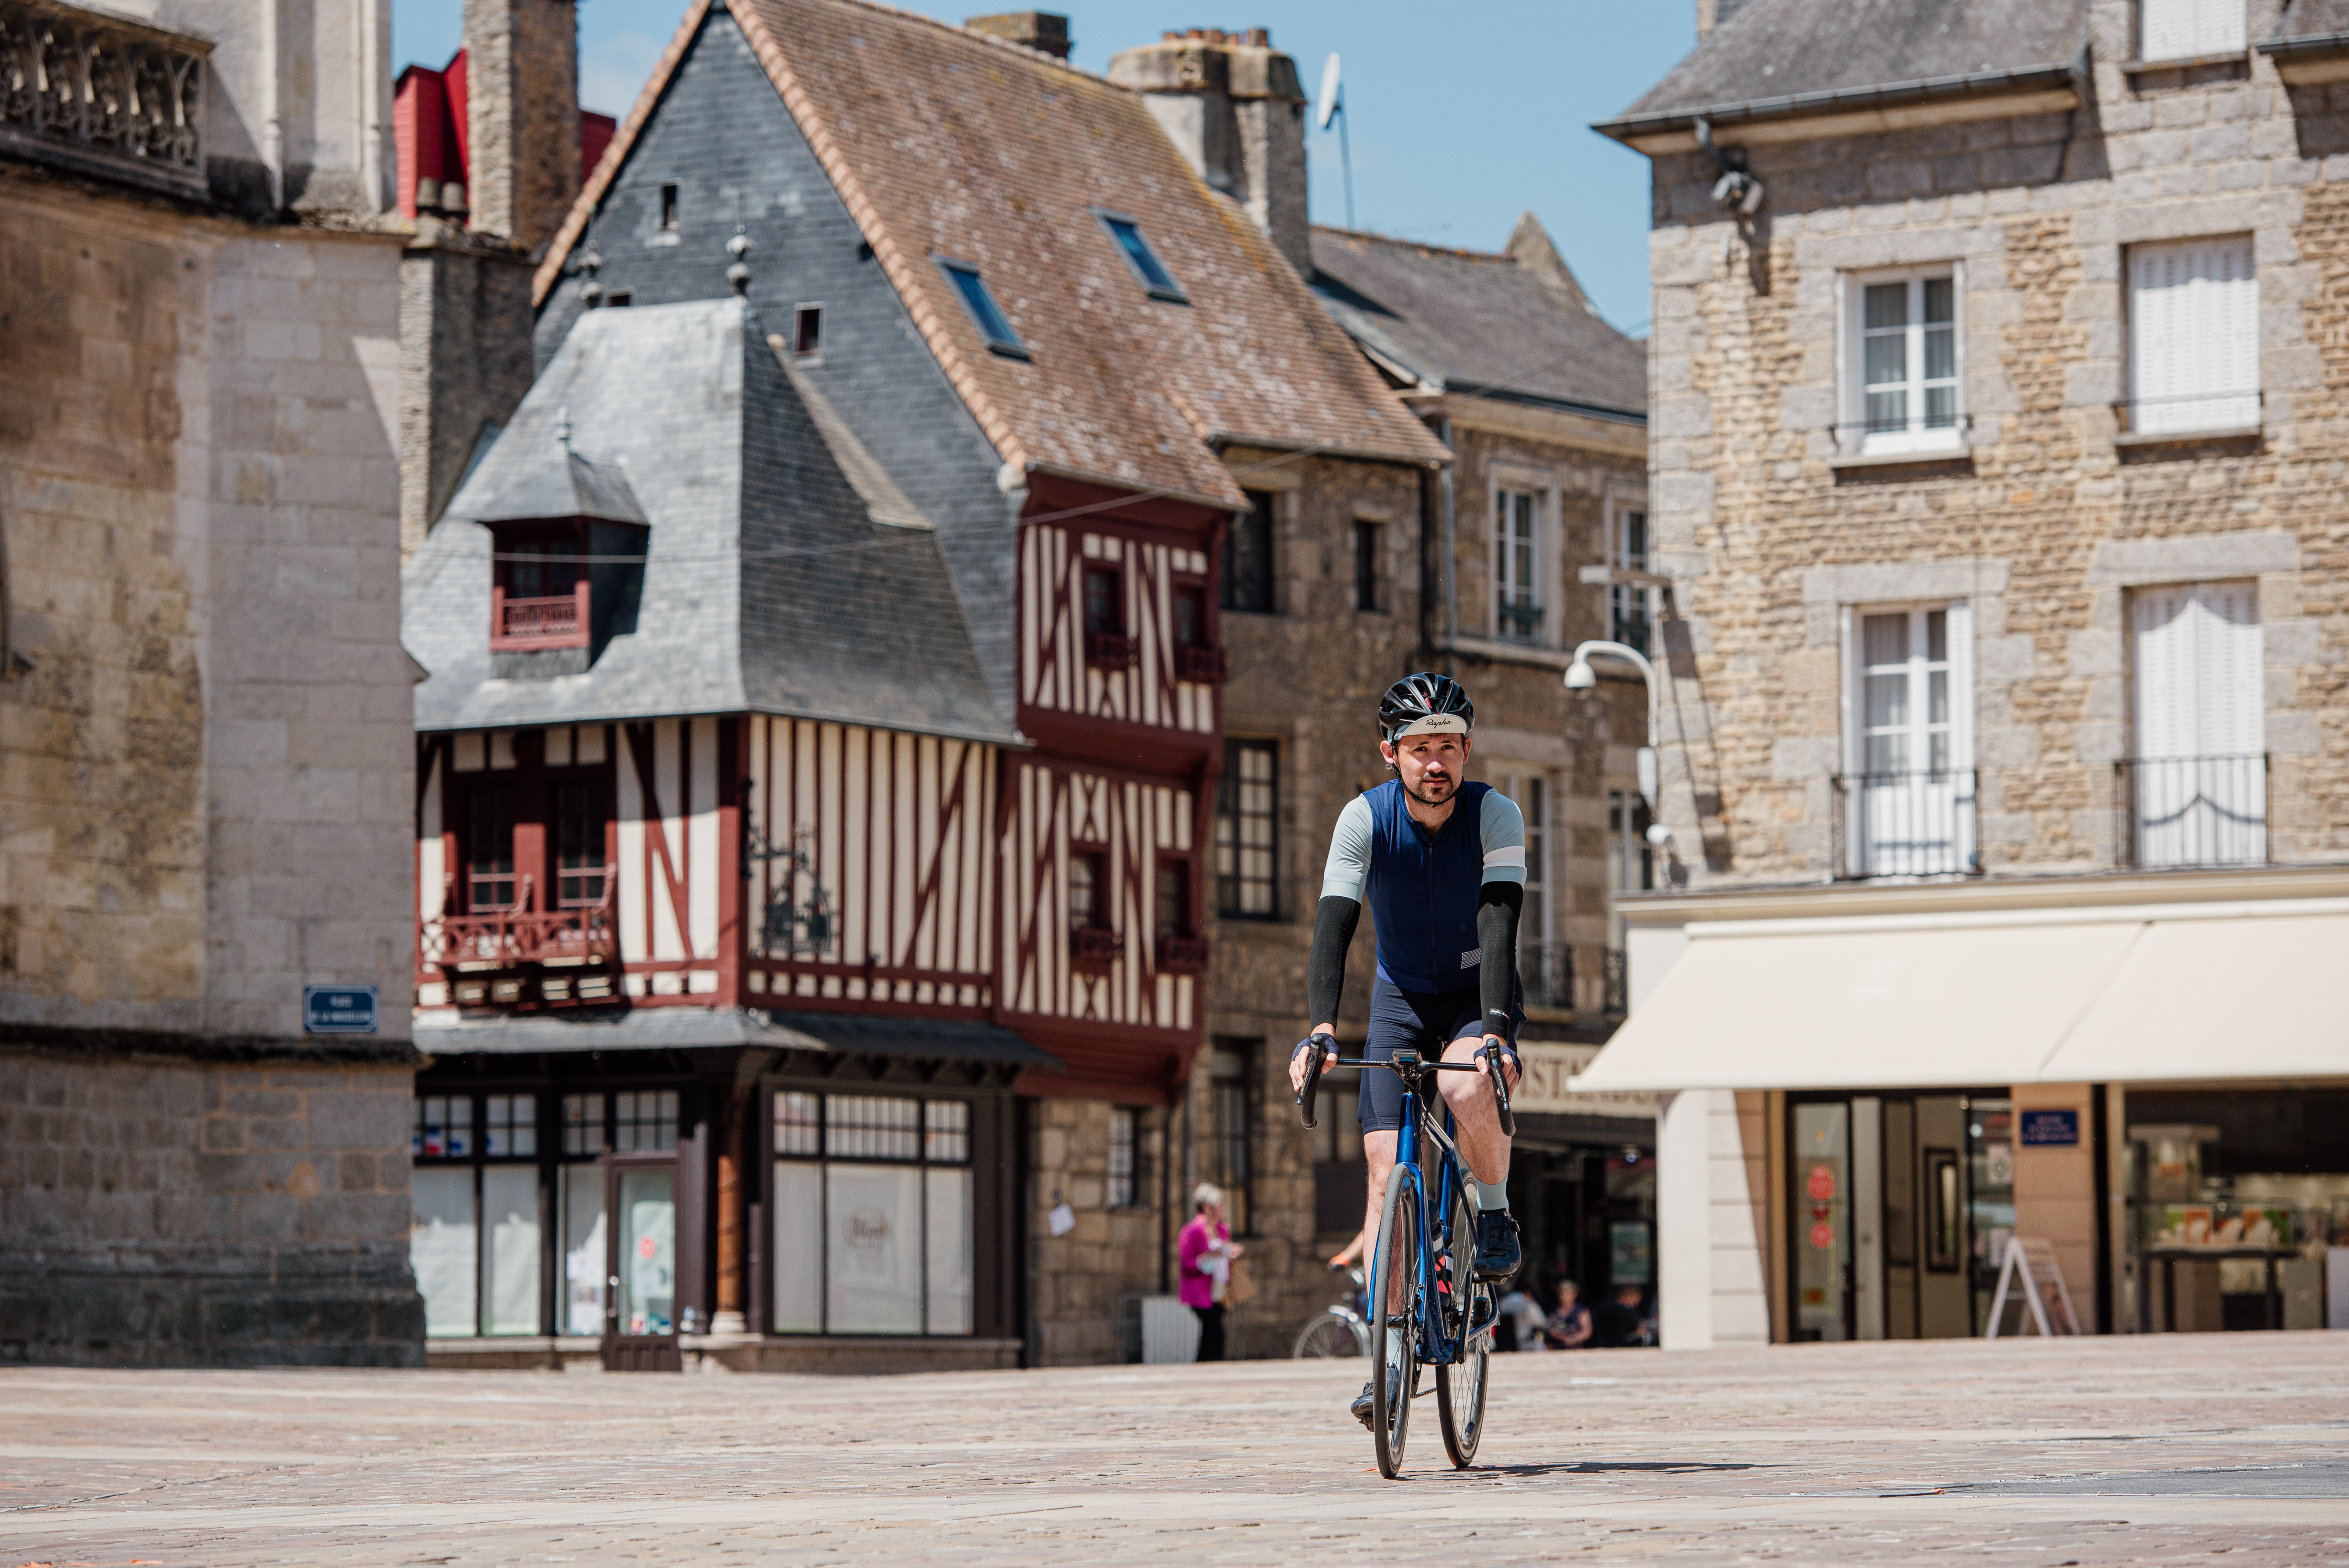 In the streets of Alençon. A cycling adventure in Normandy with Matthieu Tordeur (photo © Marie-Anaïs Thierry)